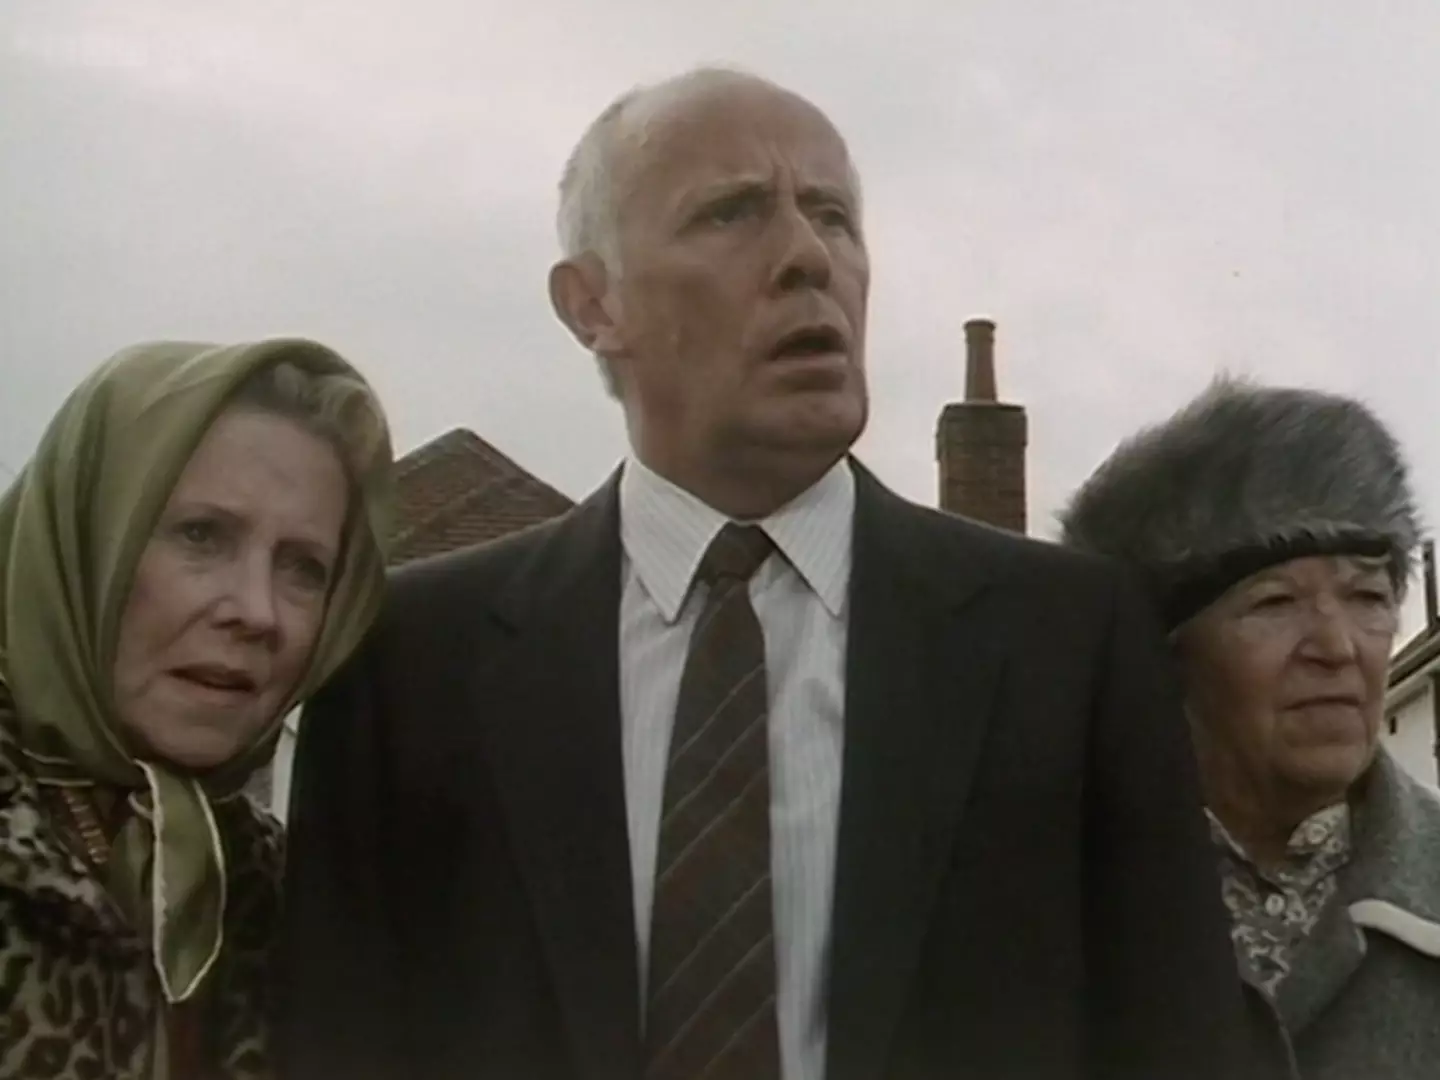 Here's Richard Wilson in the first episode of One Foot in the Grave.